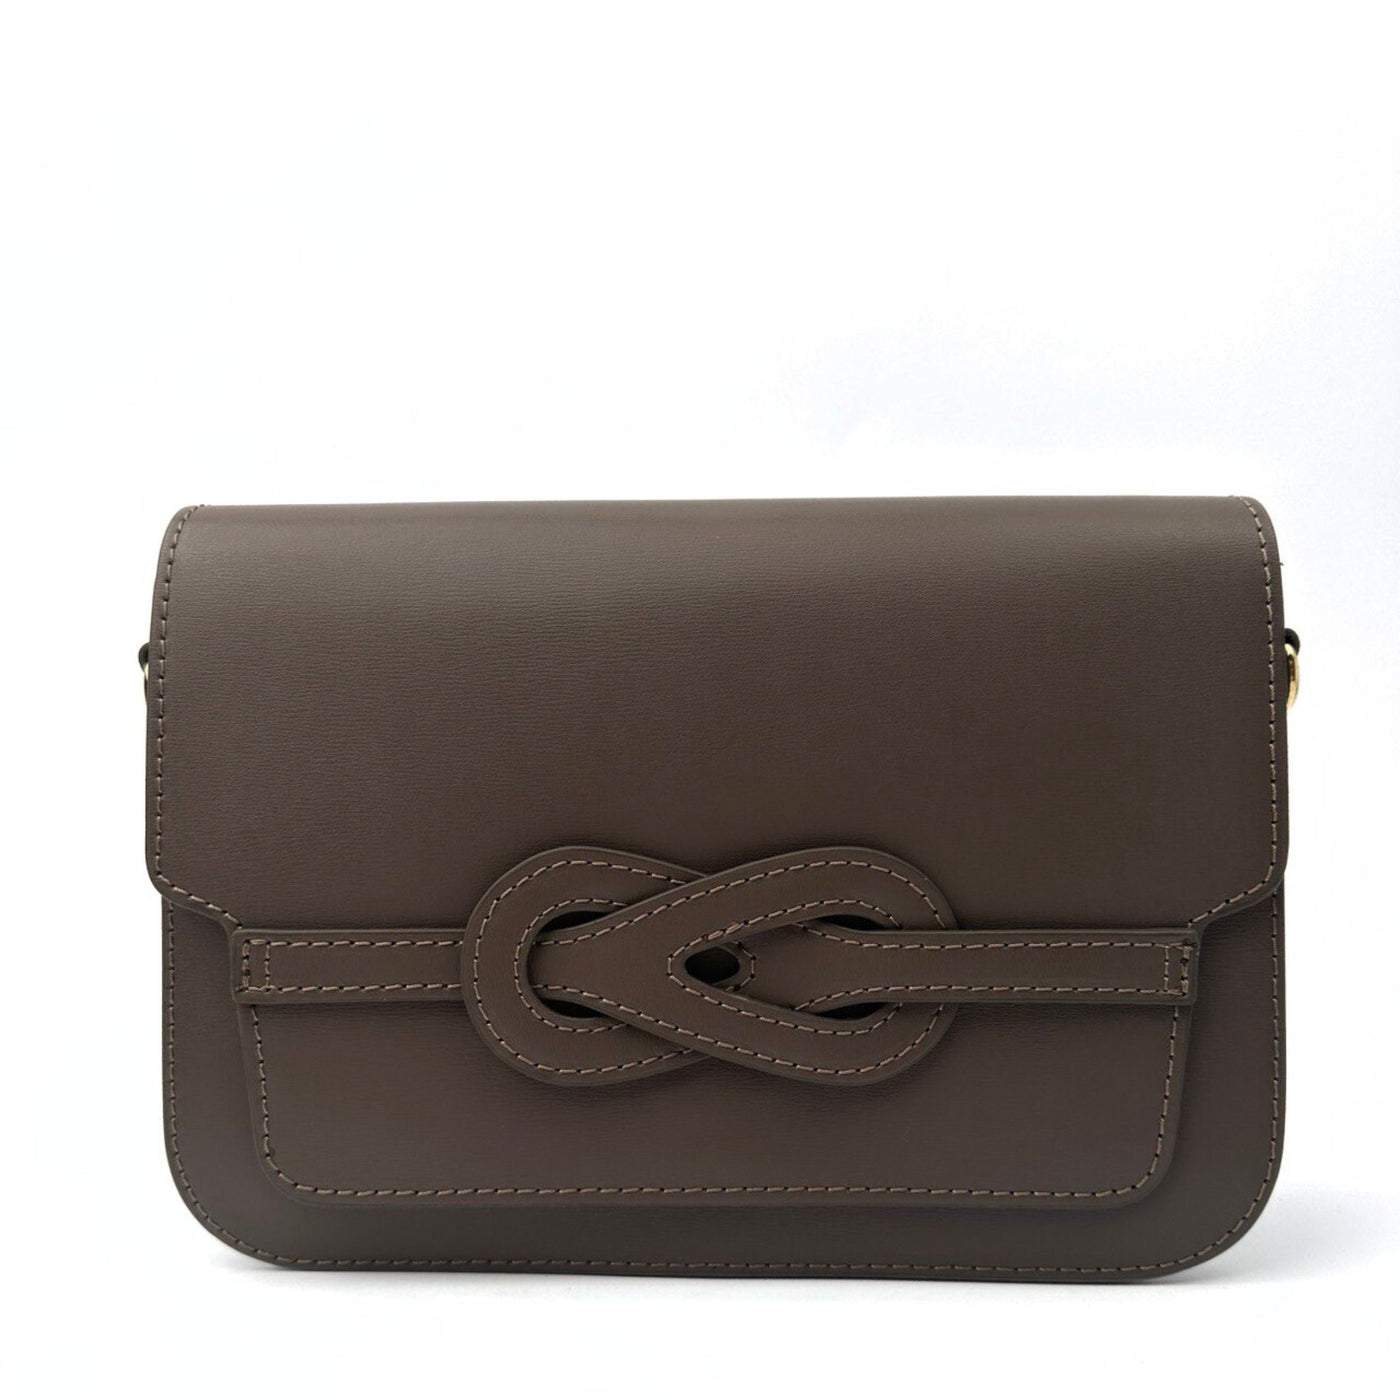 Leather bag "Naples", Taupe